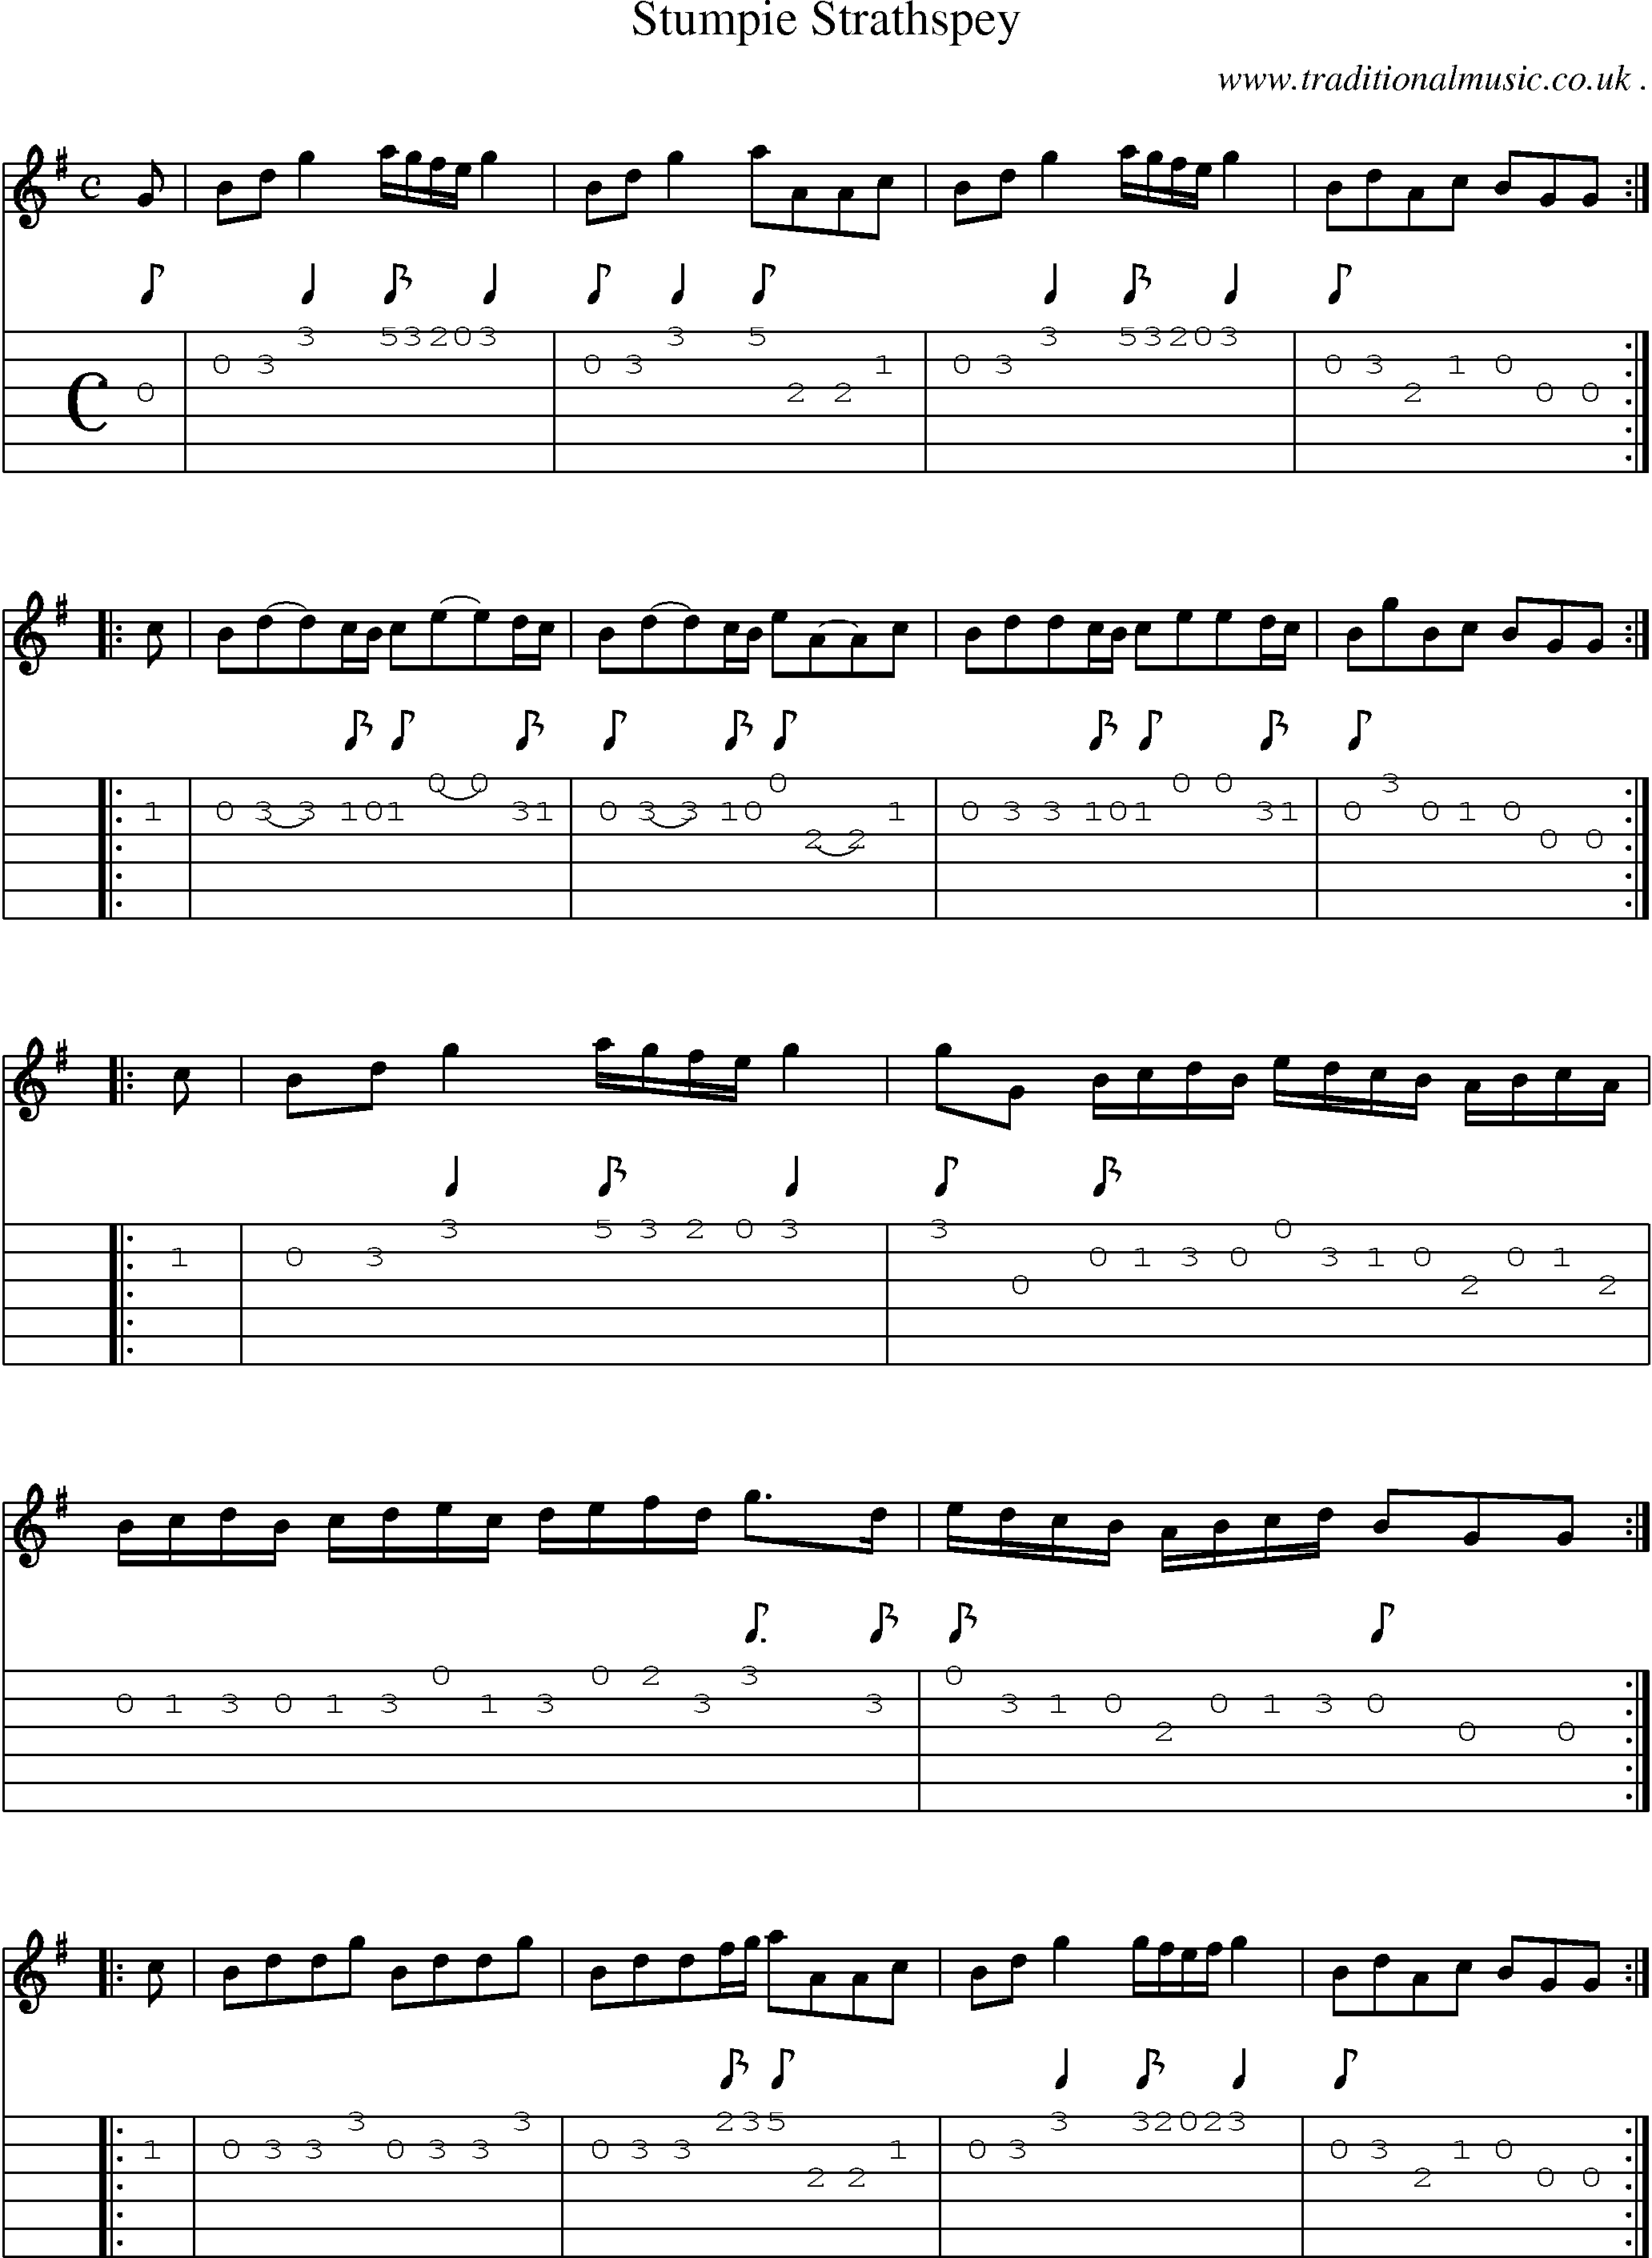 Sheet-Music and Guitar Tabs for Stumpie Strathspey